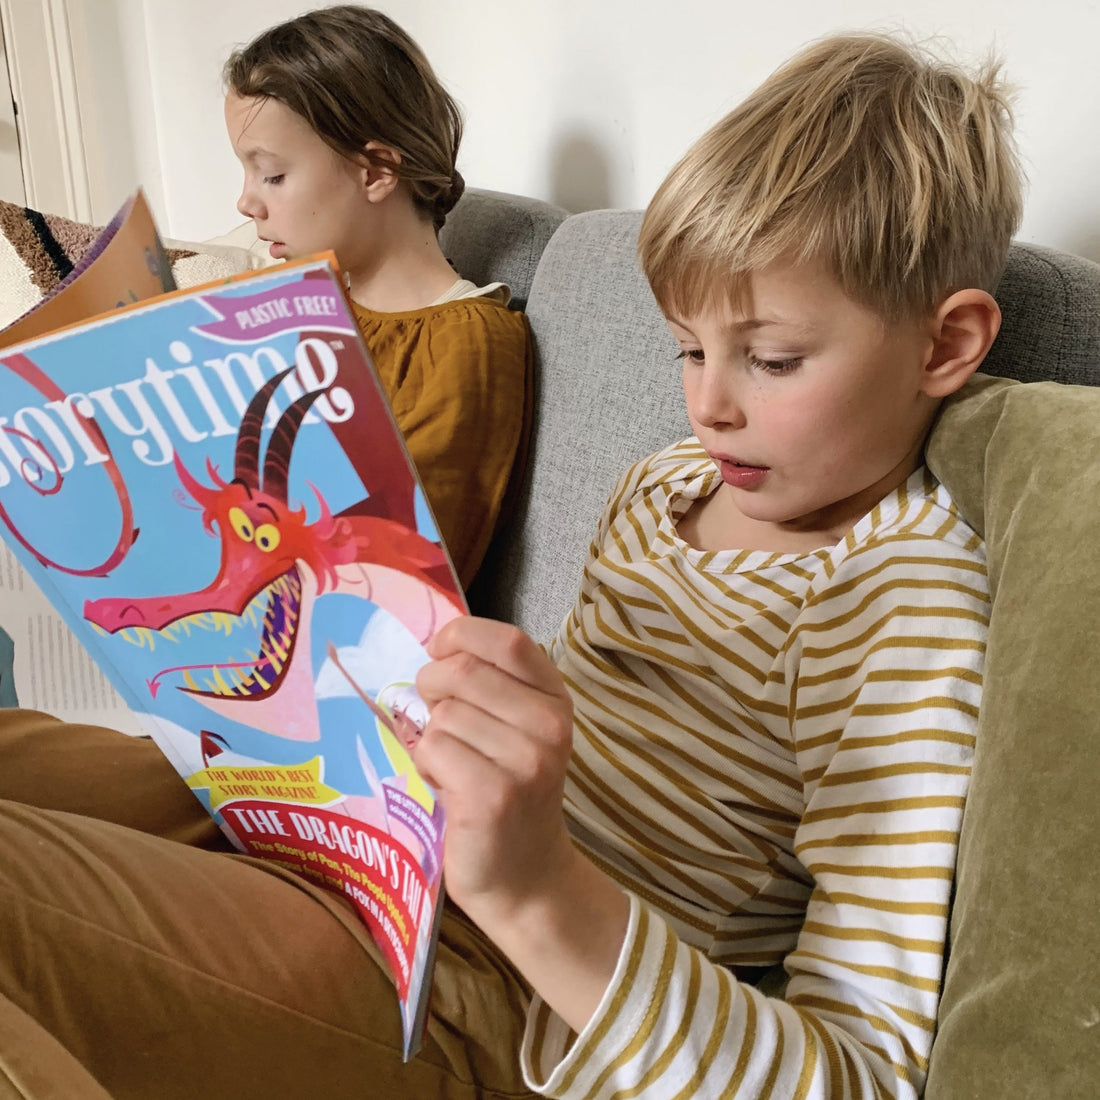 Get reading with Storytime Magazine!